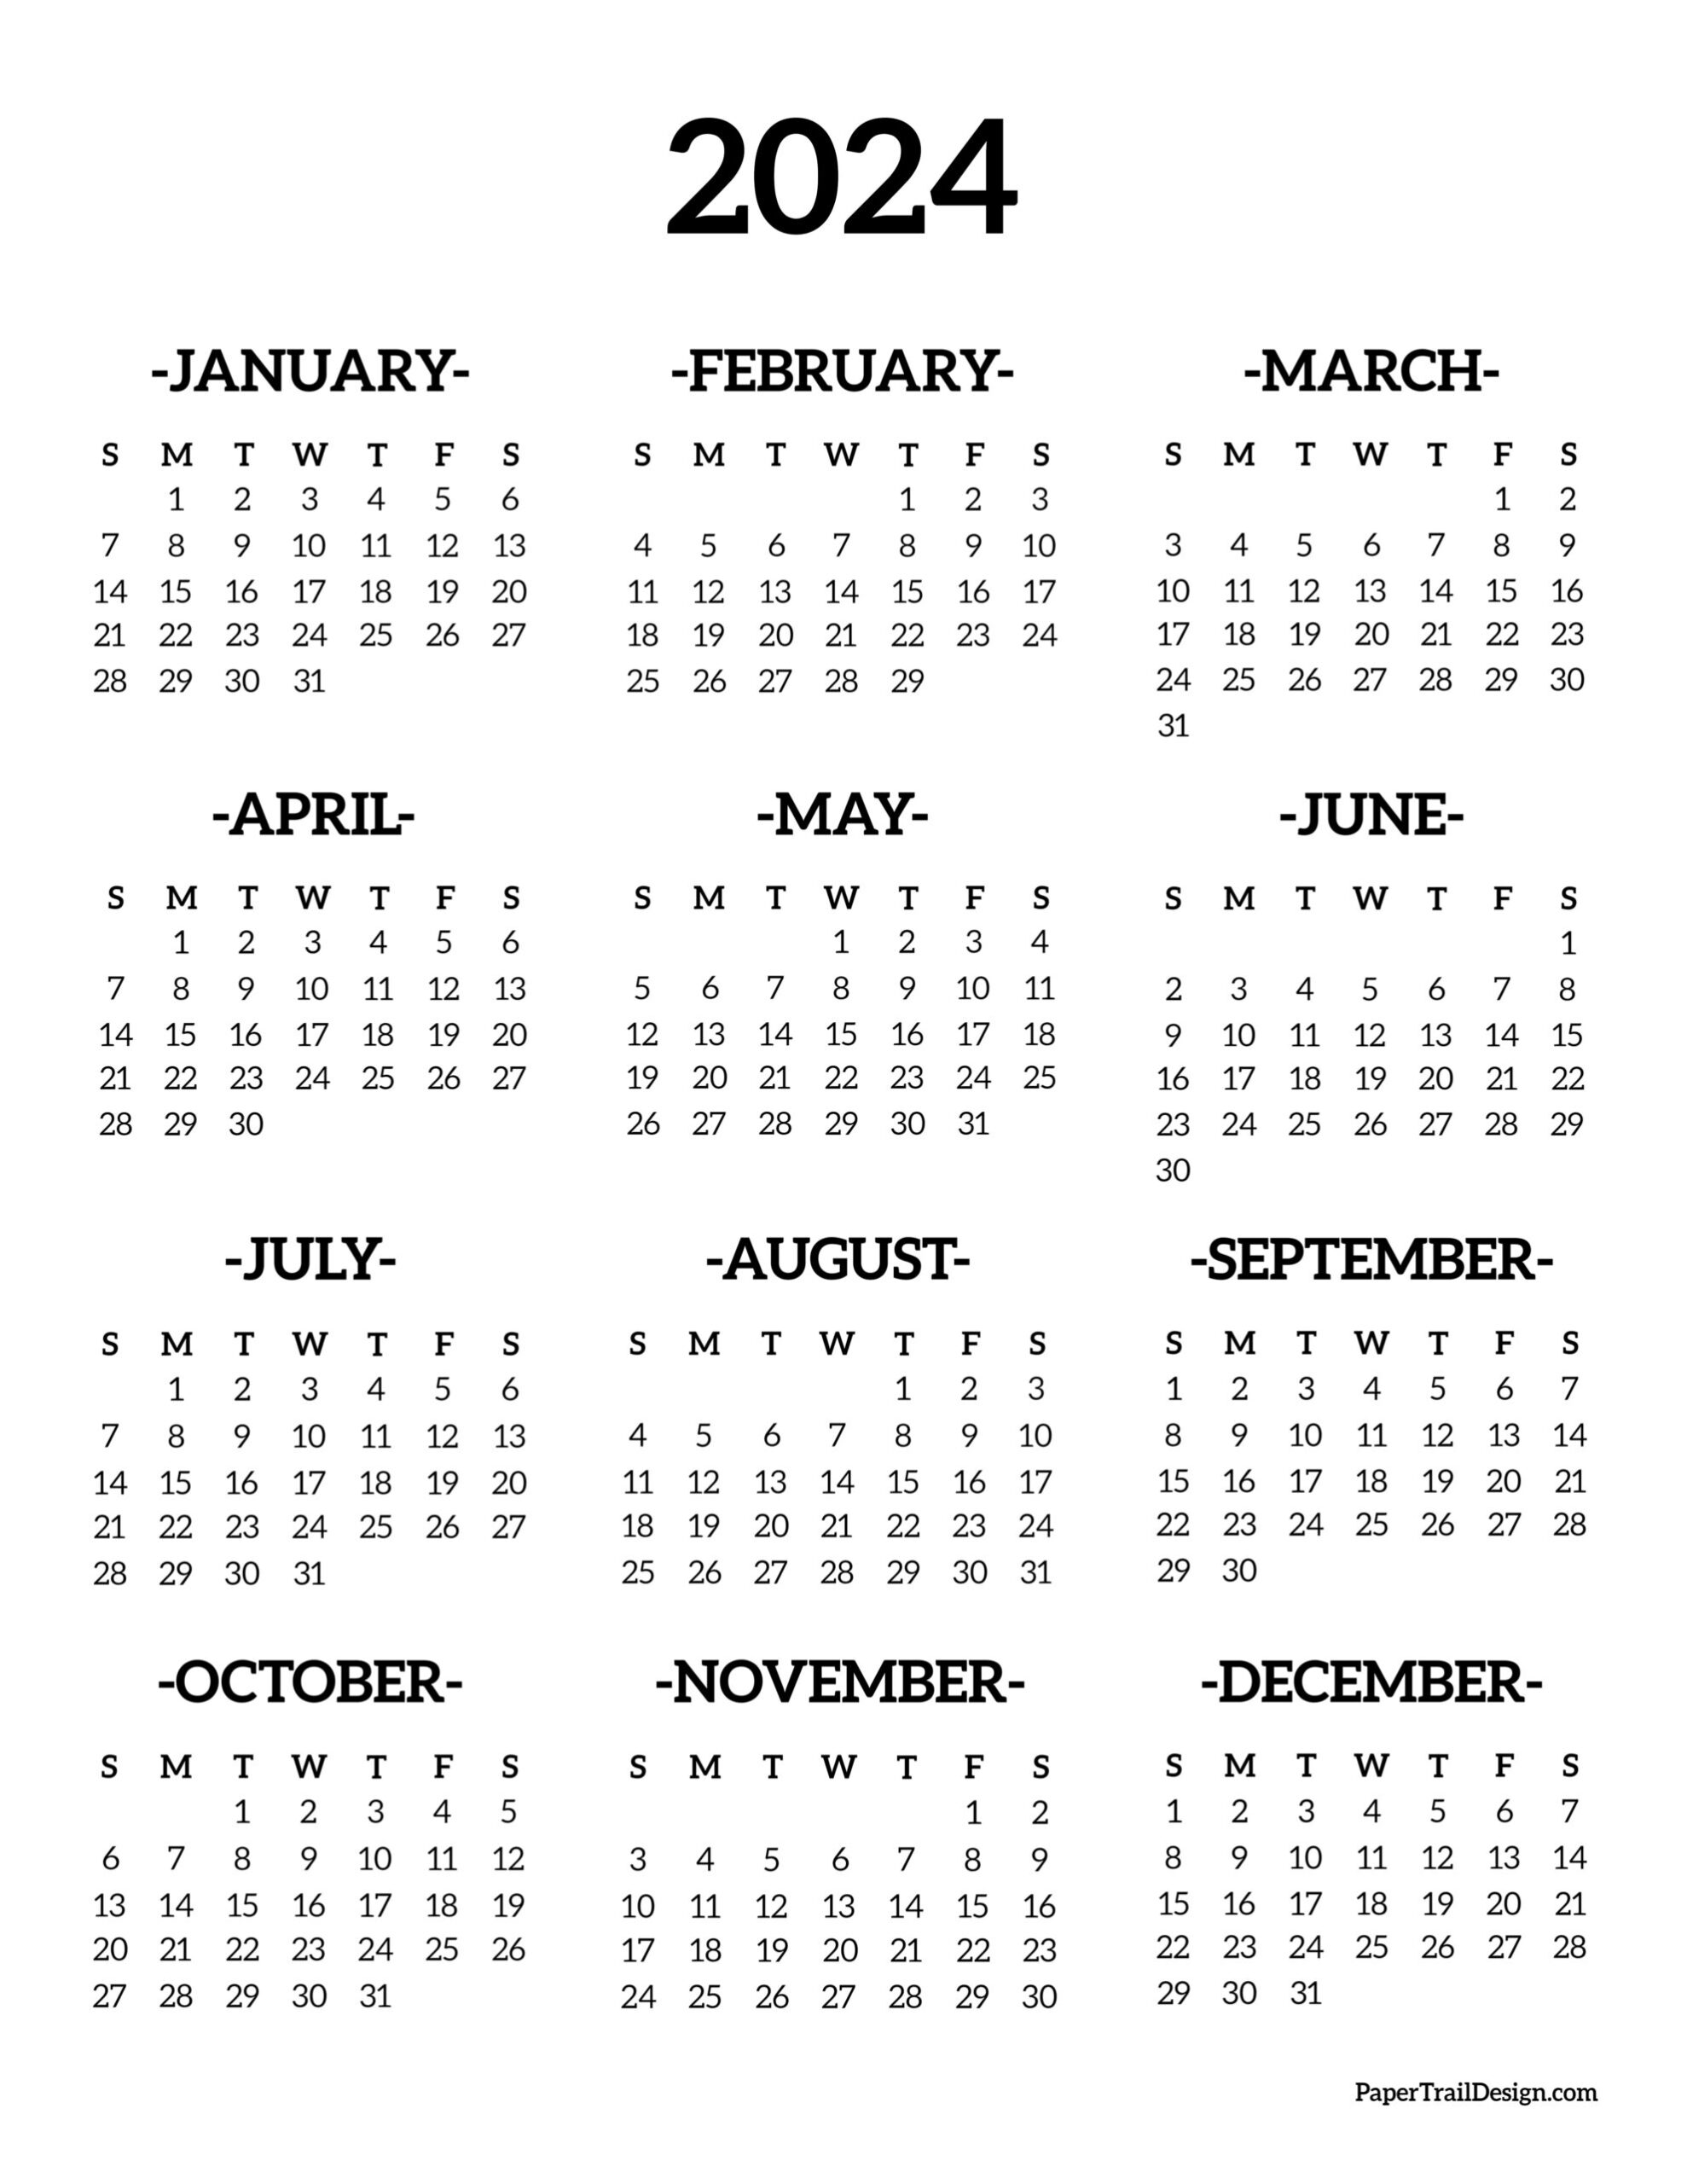 Calendar 2024 Printable One Page - Paper Trail Design for Free Printable 2024 Wall Calendar